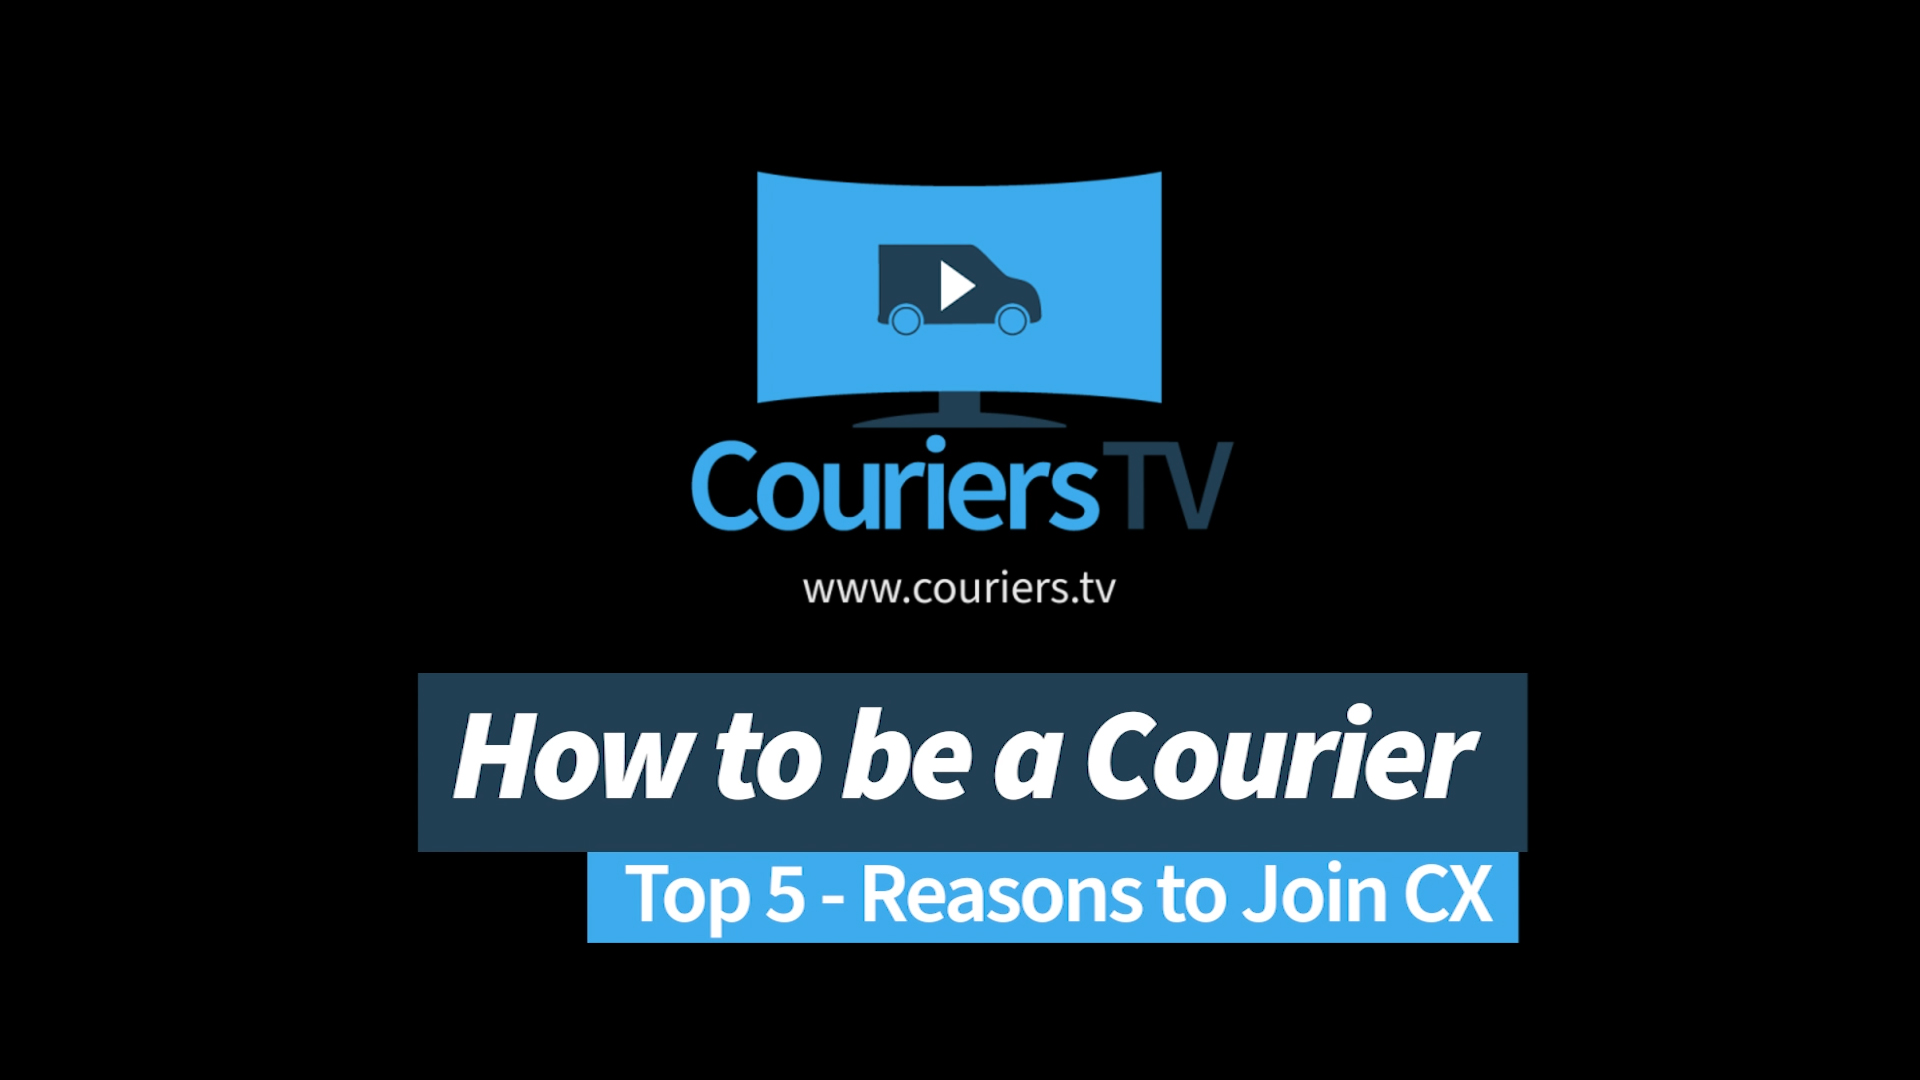 5 Reasons to Join CX